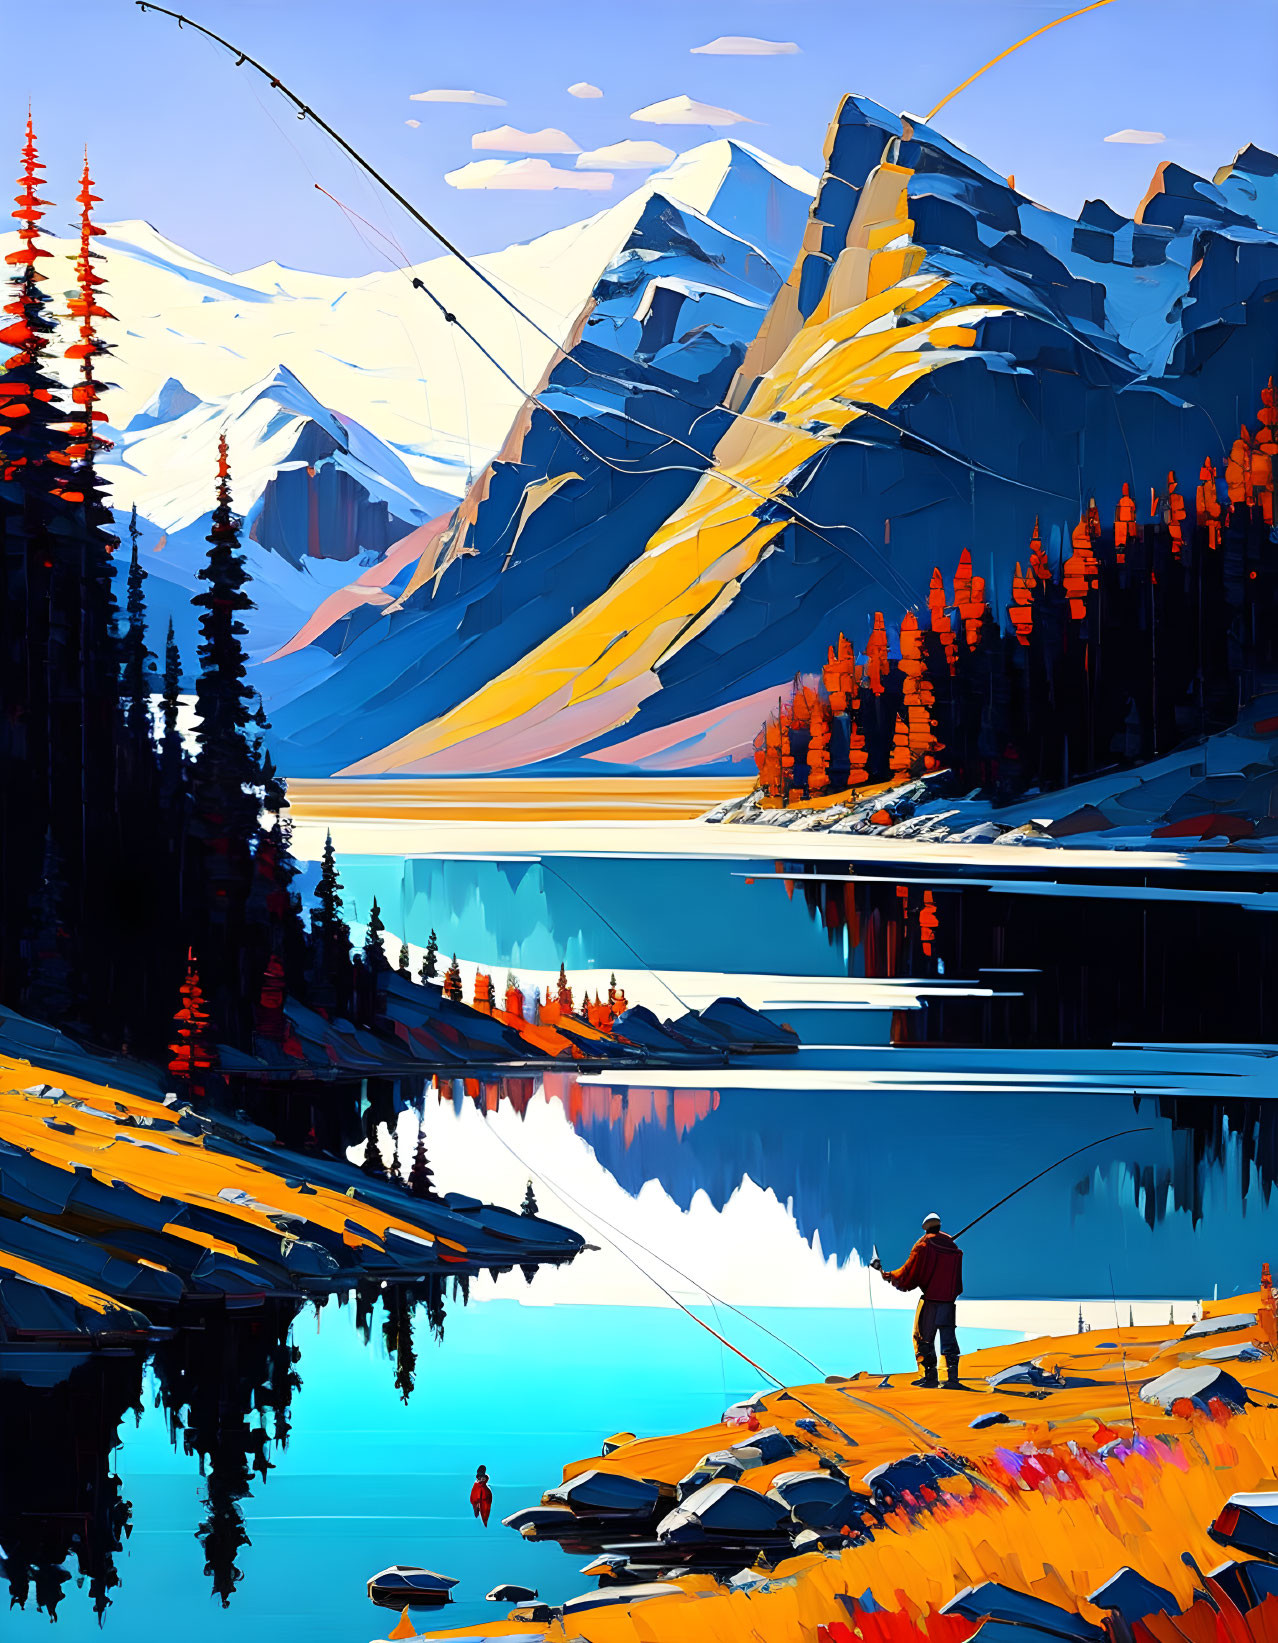 Digital artwork: Fisherman by tranquil lake with autumn trees and snow-capped mountains.